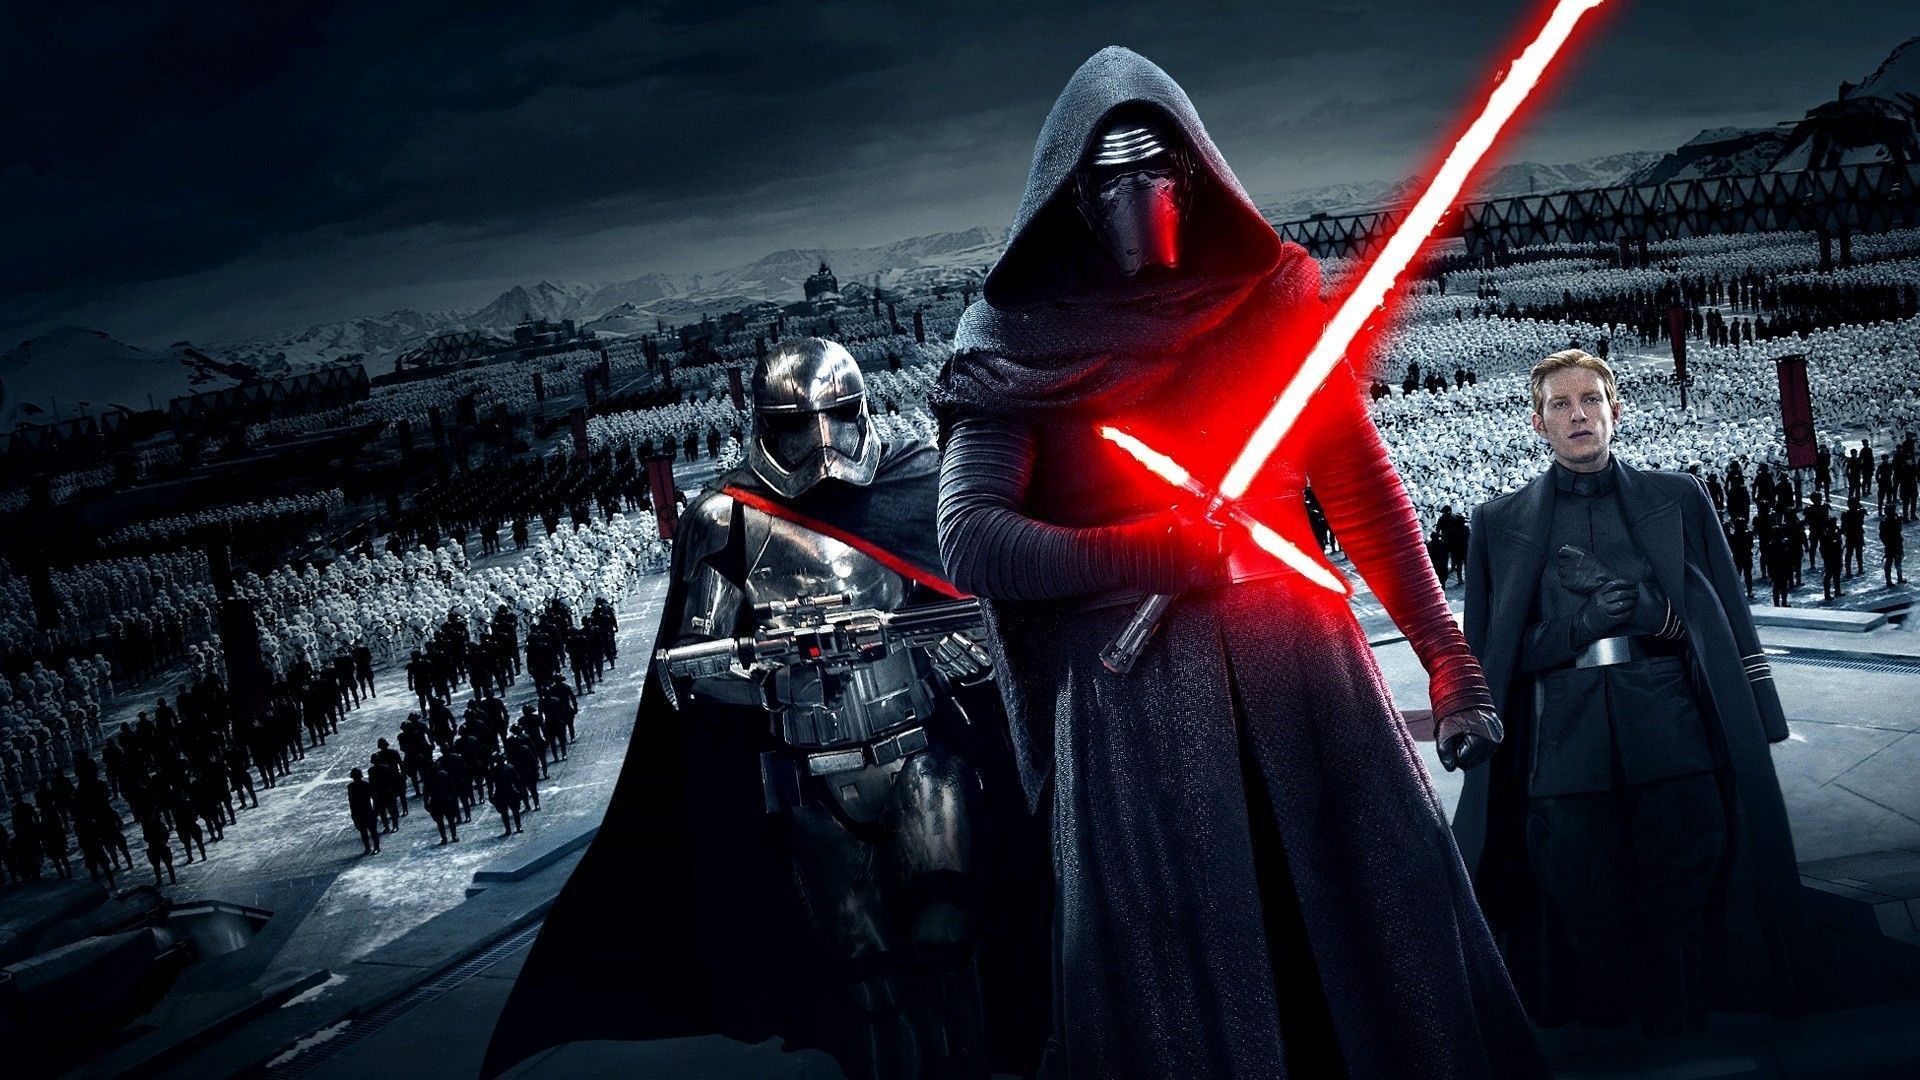 Star Wars Wallpapers Hd 1080p Group 89